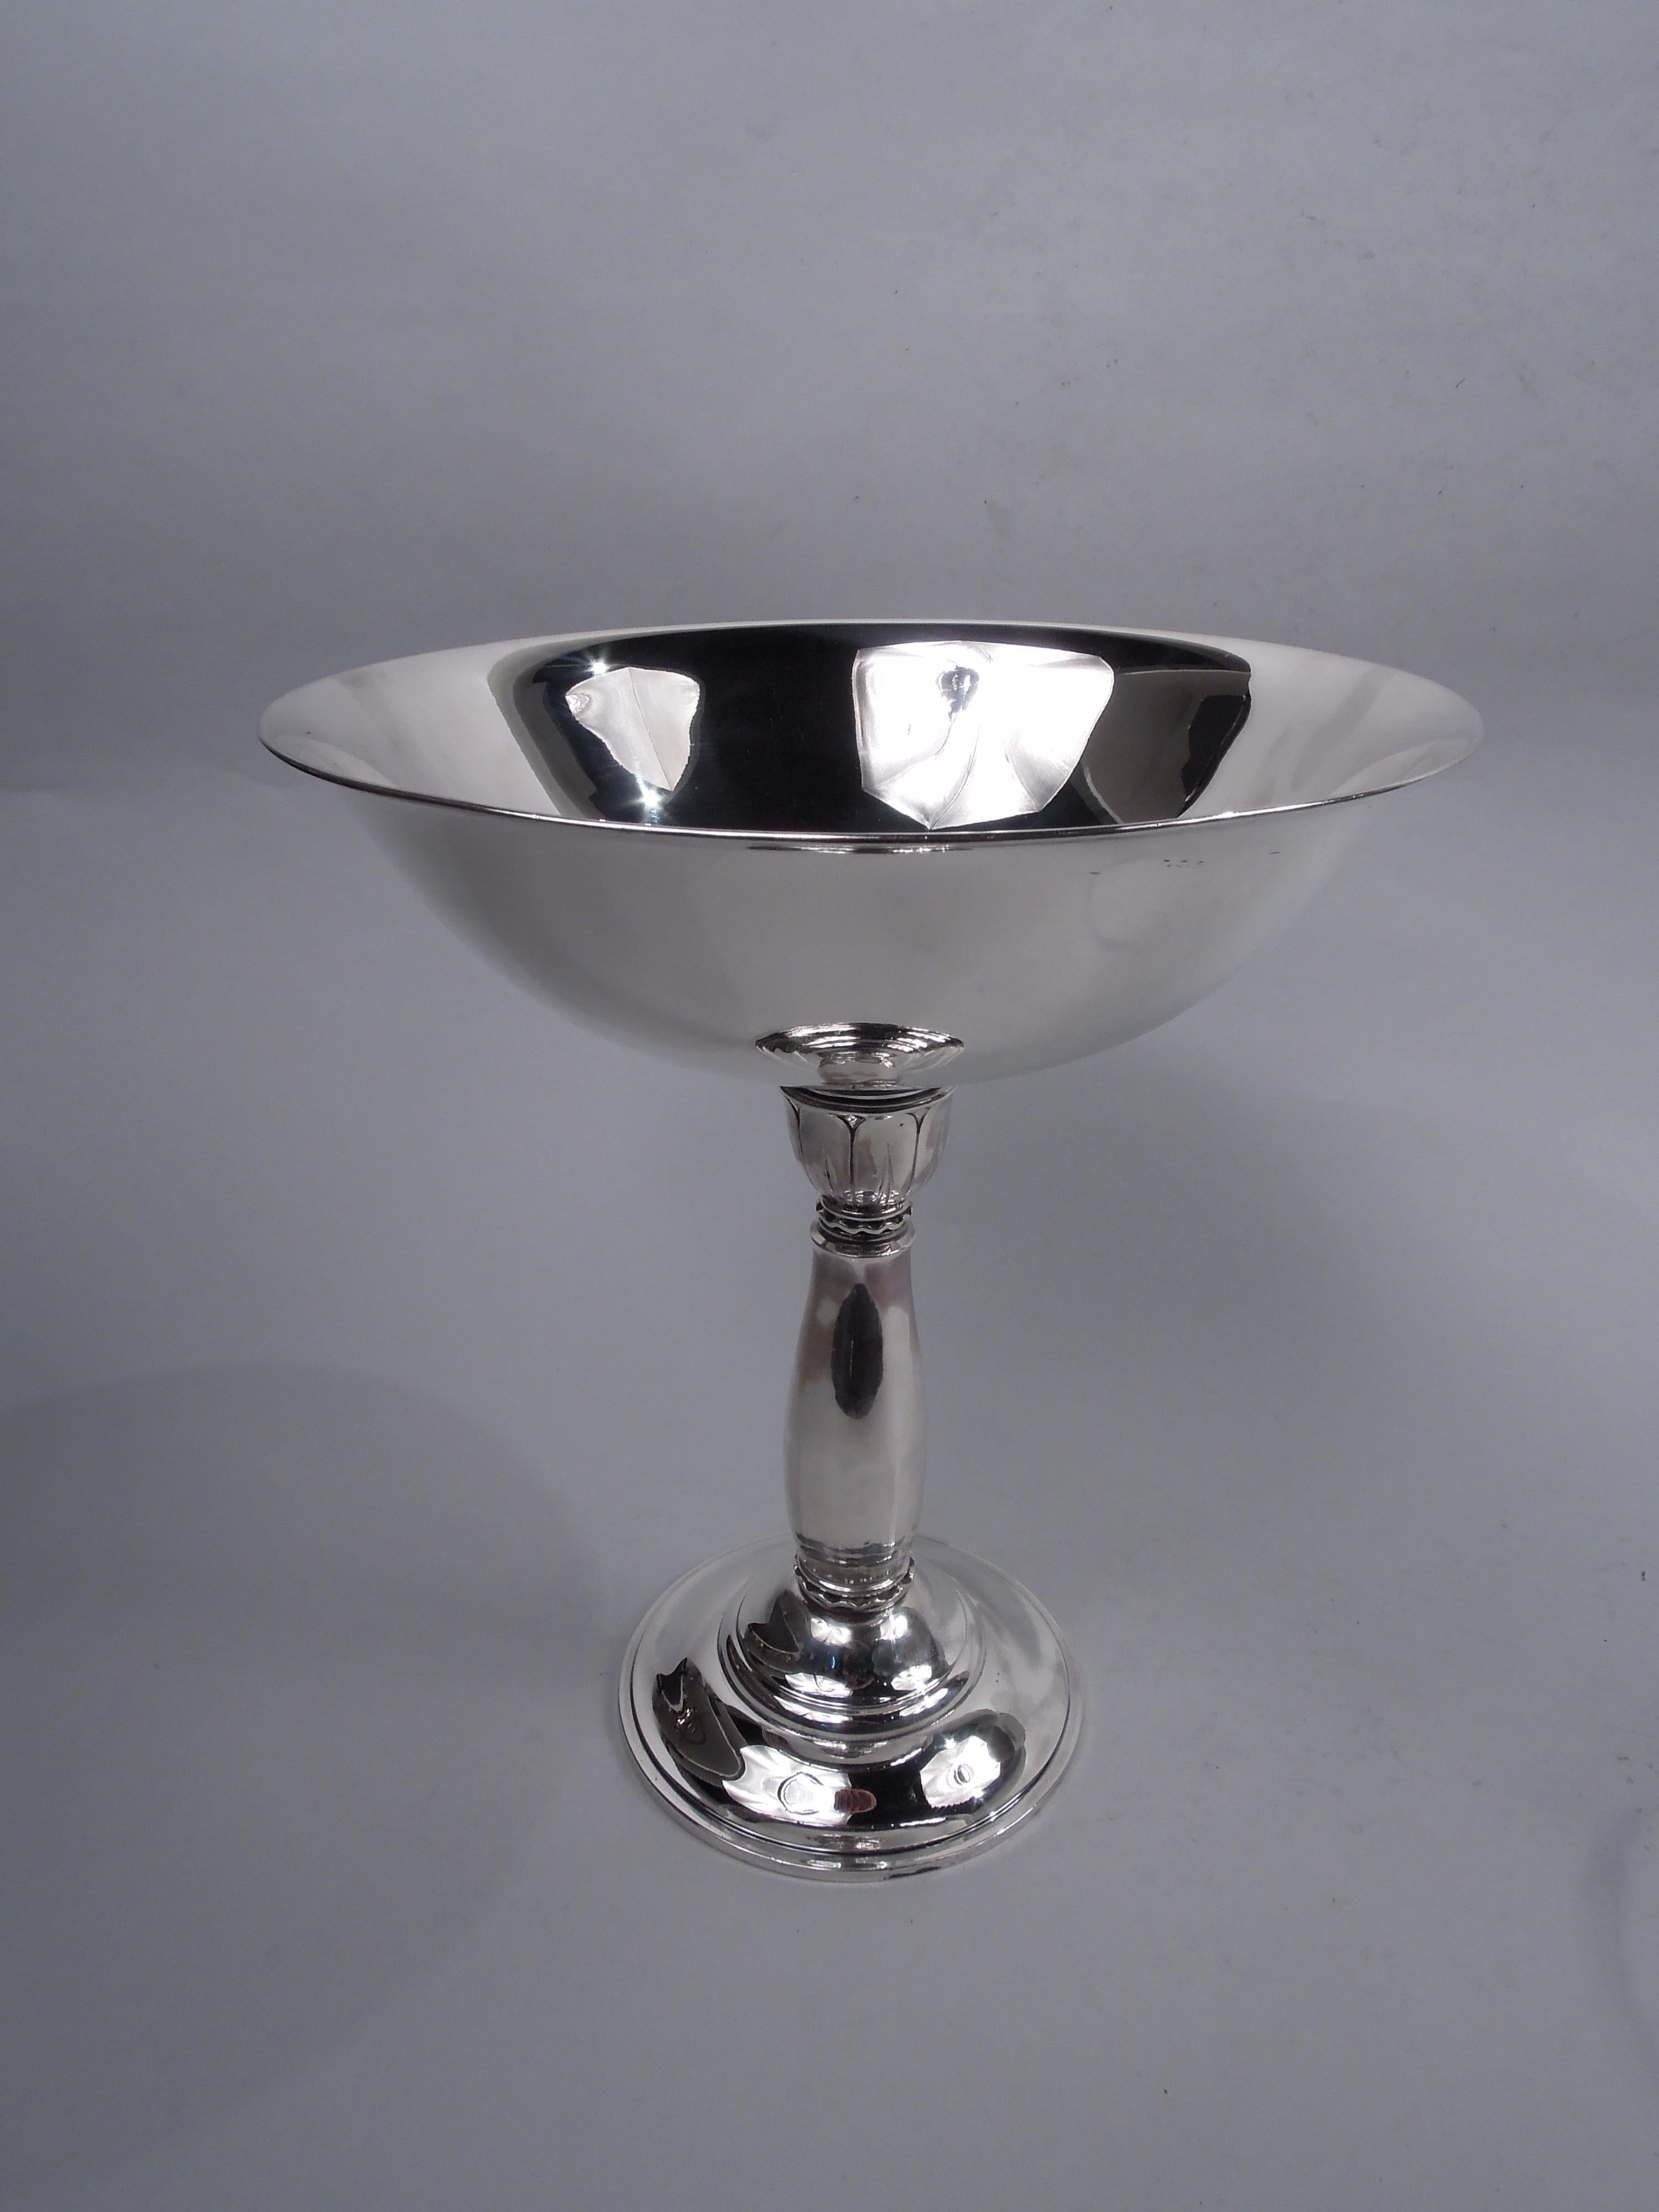 Danish Midcentury Modern sterling silver compote. Wide and round bowl mounted to shaft with understated Classical ornament: Urn with bold and stylized leaf-and-dart ornament on sides, in turn mounted to baluster with half fluting; wavy borders.